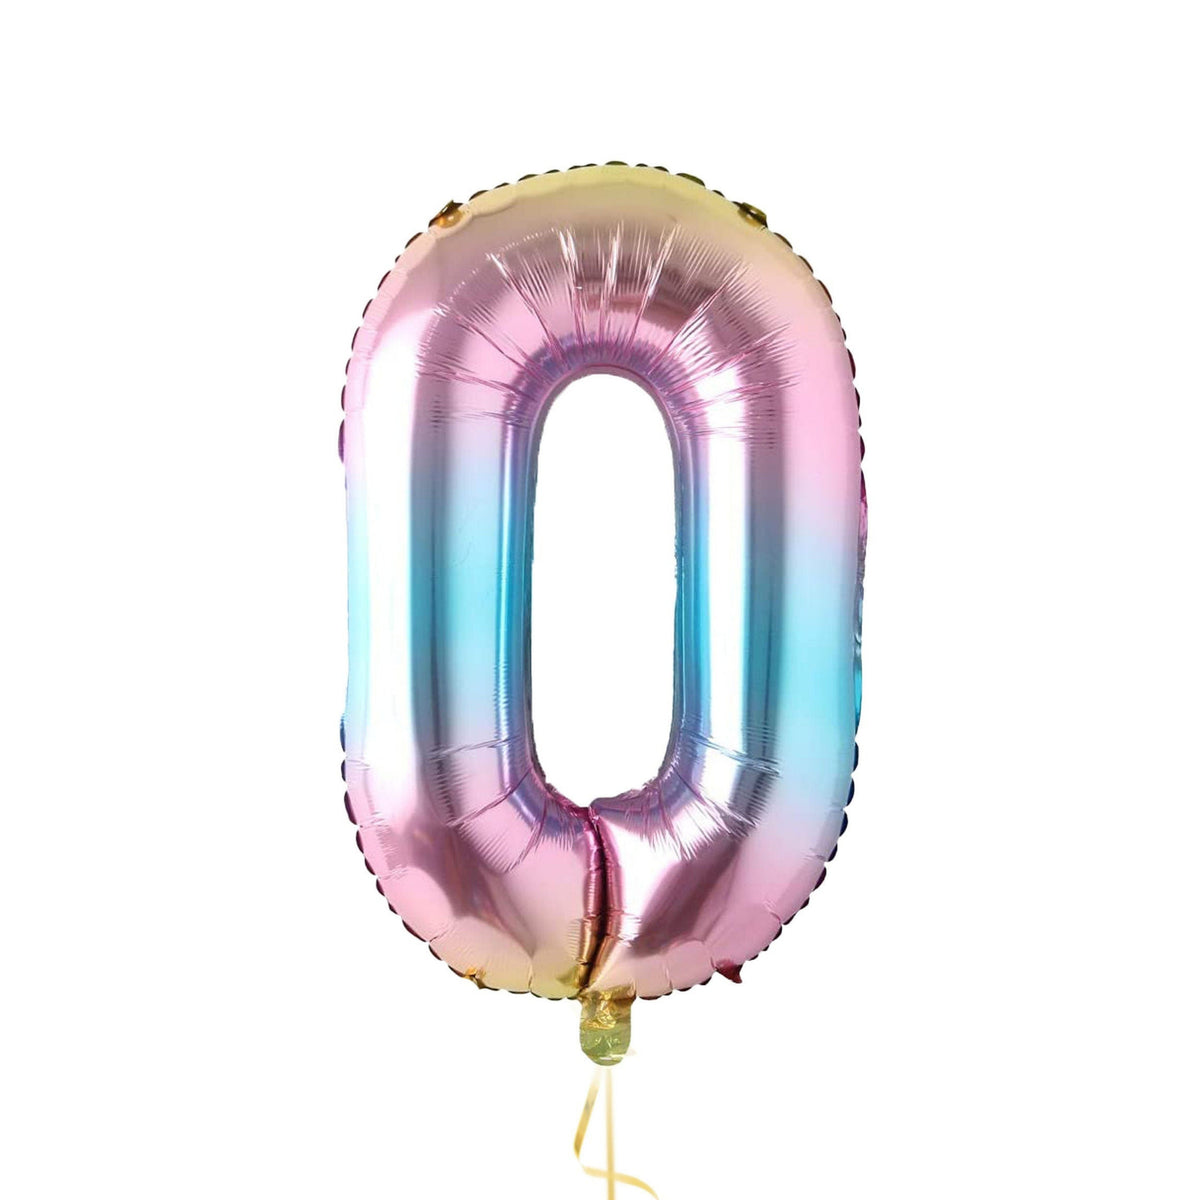 32 Inch Foil Holographic Zero Shaped Balloon - Add a Dazzling Touch to Milestone Celebrations!